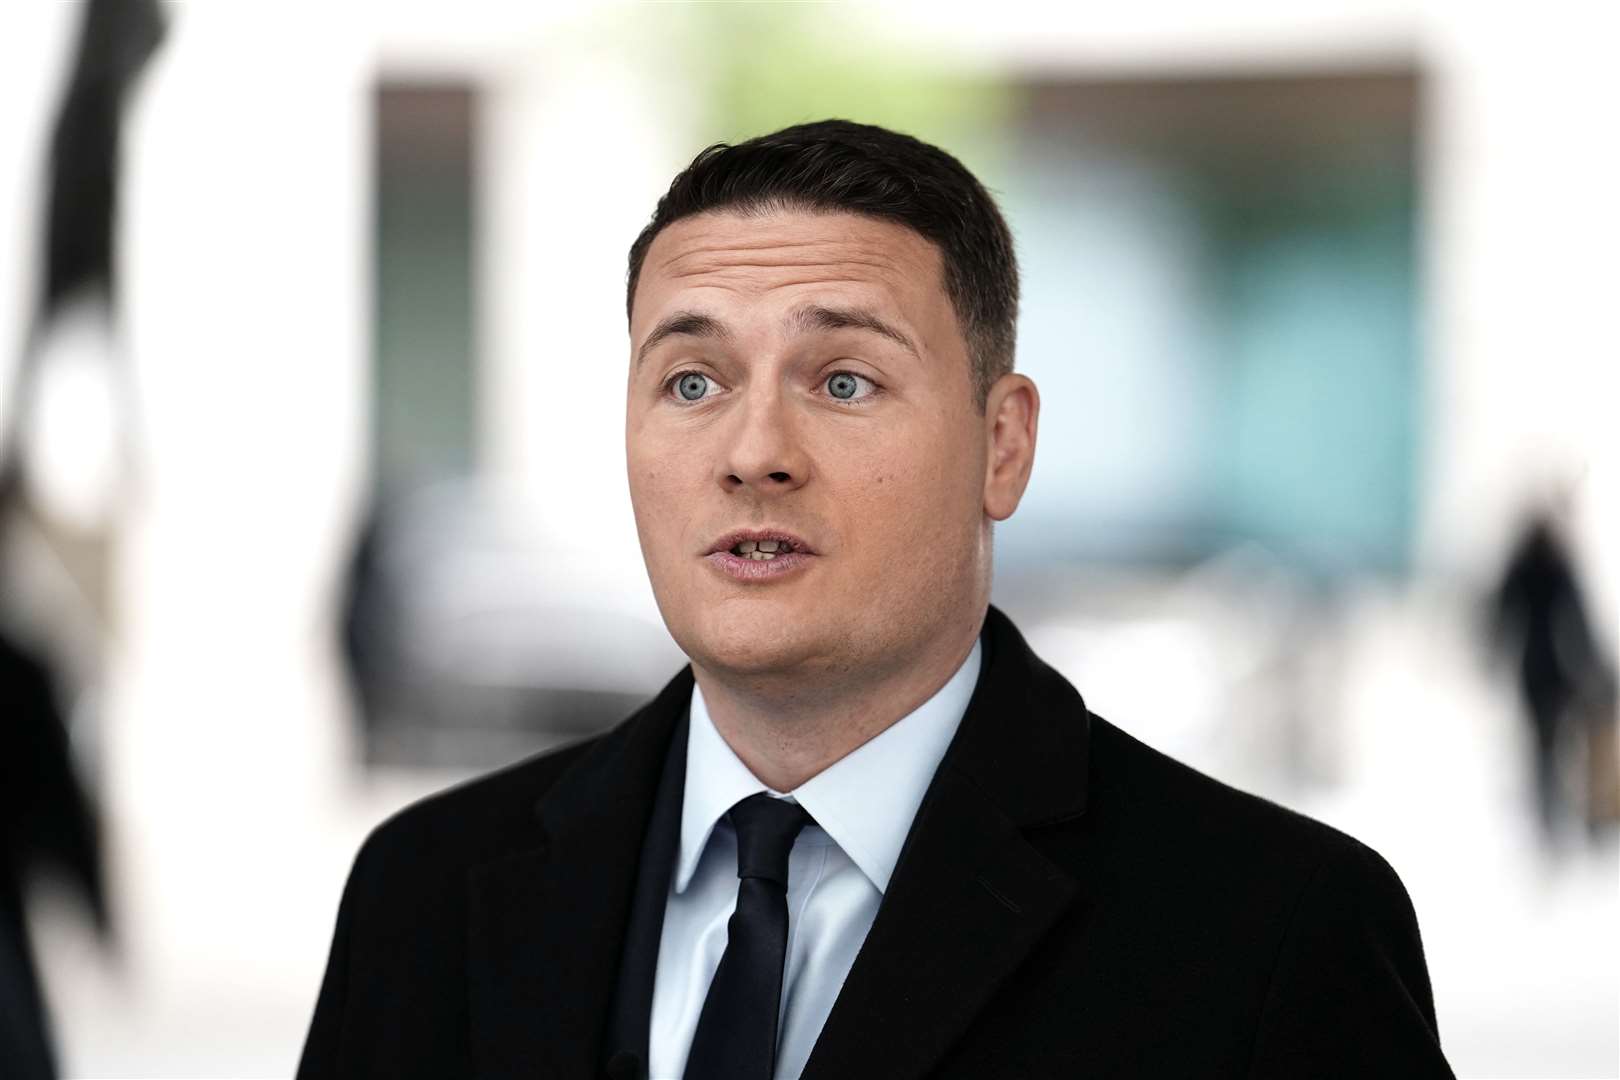 Shadow health secretary Wes Streeting claimed the Health Secretary and Chancellor were split on the issue of NHS pay (Jordan Pettitt/PA)